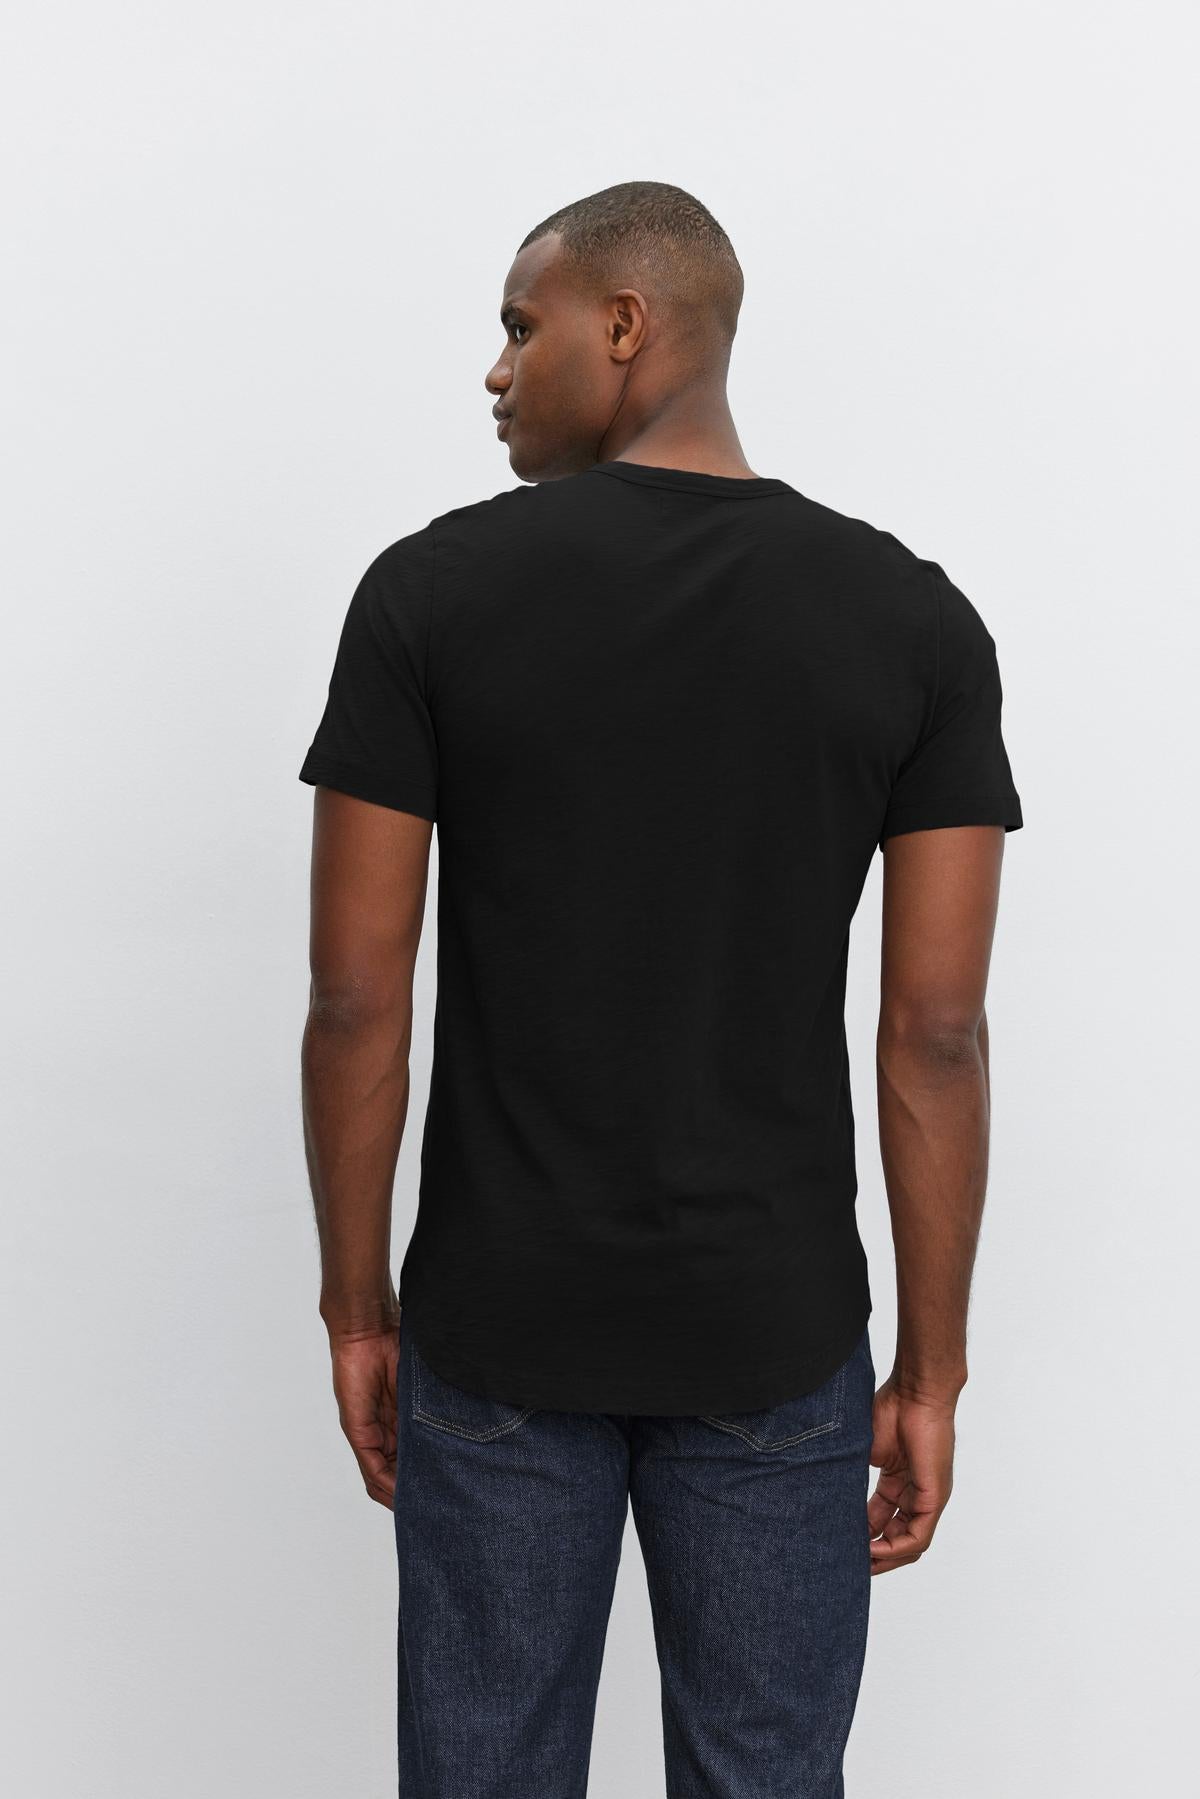 Man wearing a plain black, slub knit Velvet by Graham & Spencer AMARO TEE with a crew neck, viewed from the back.-36273922080961